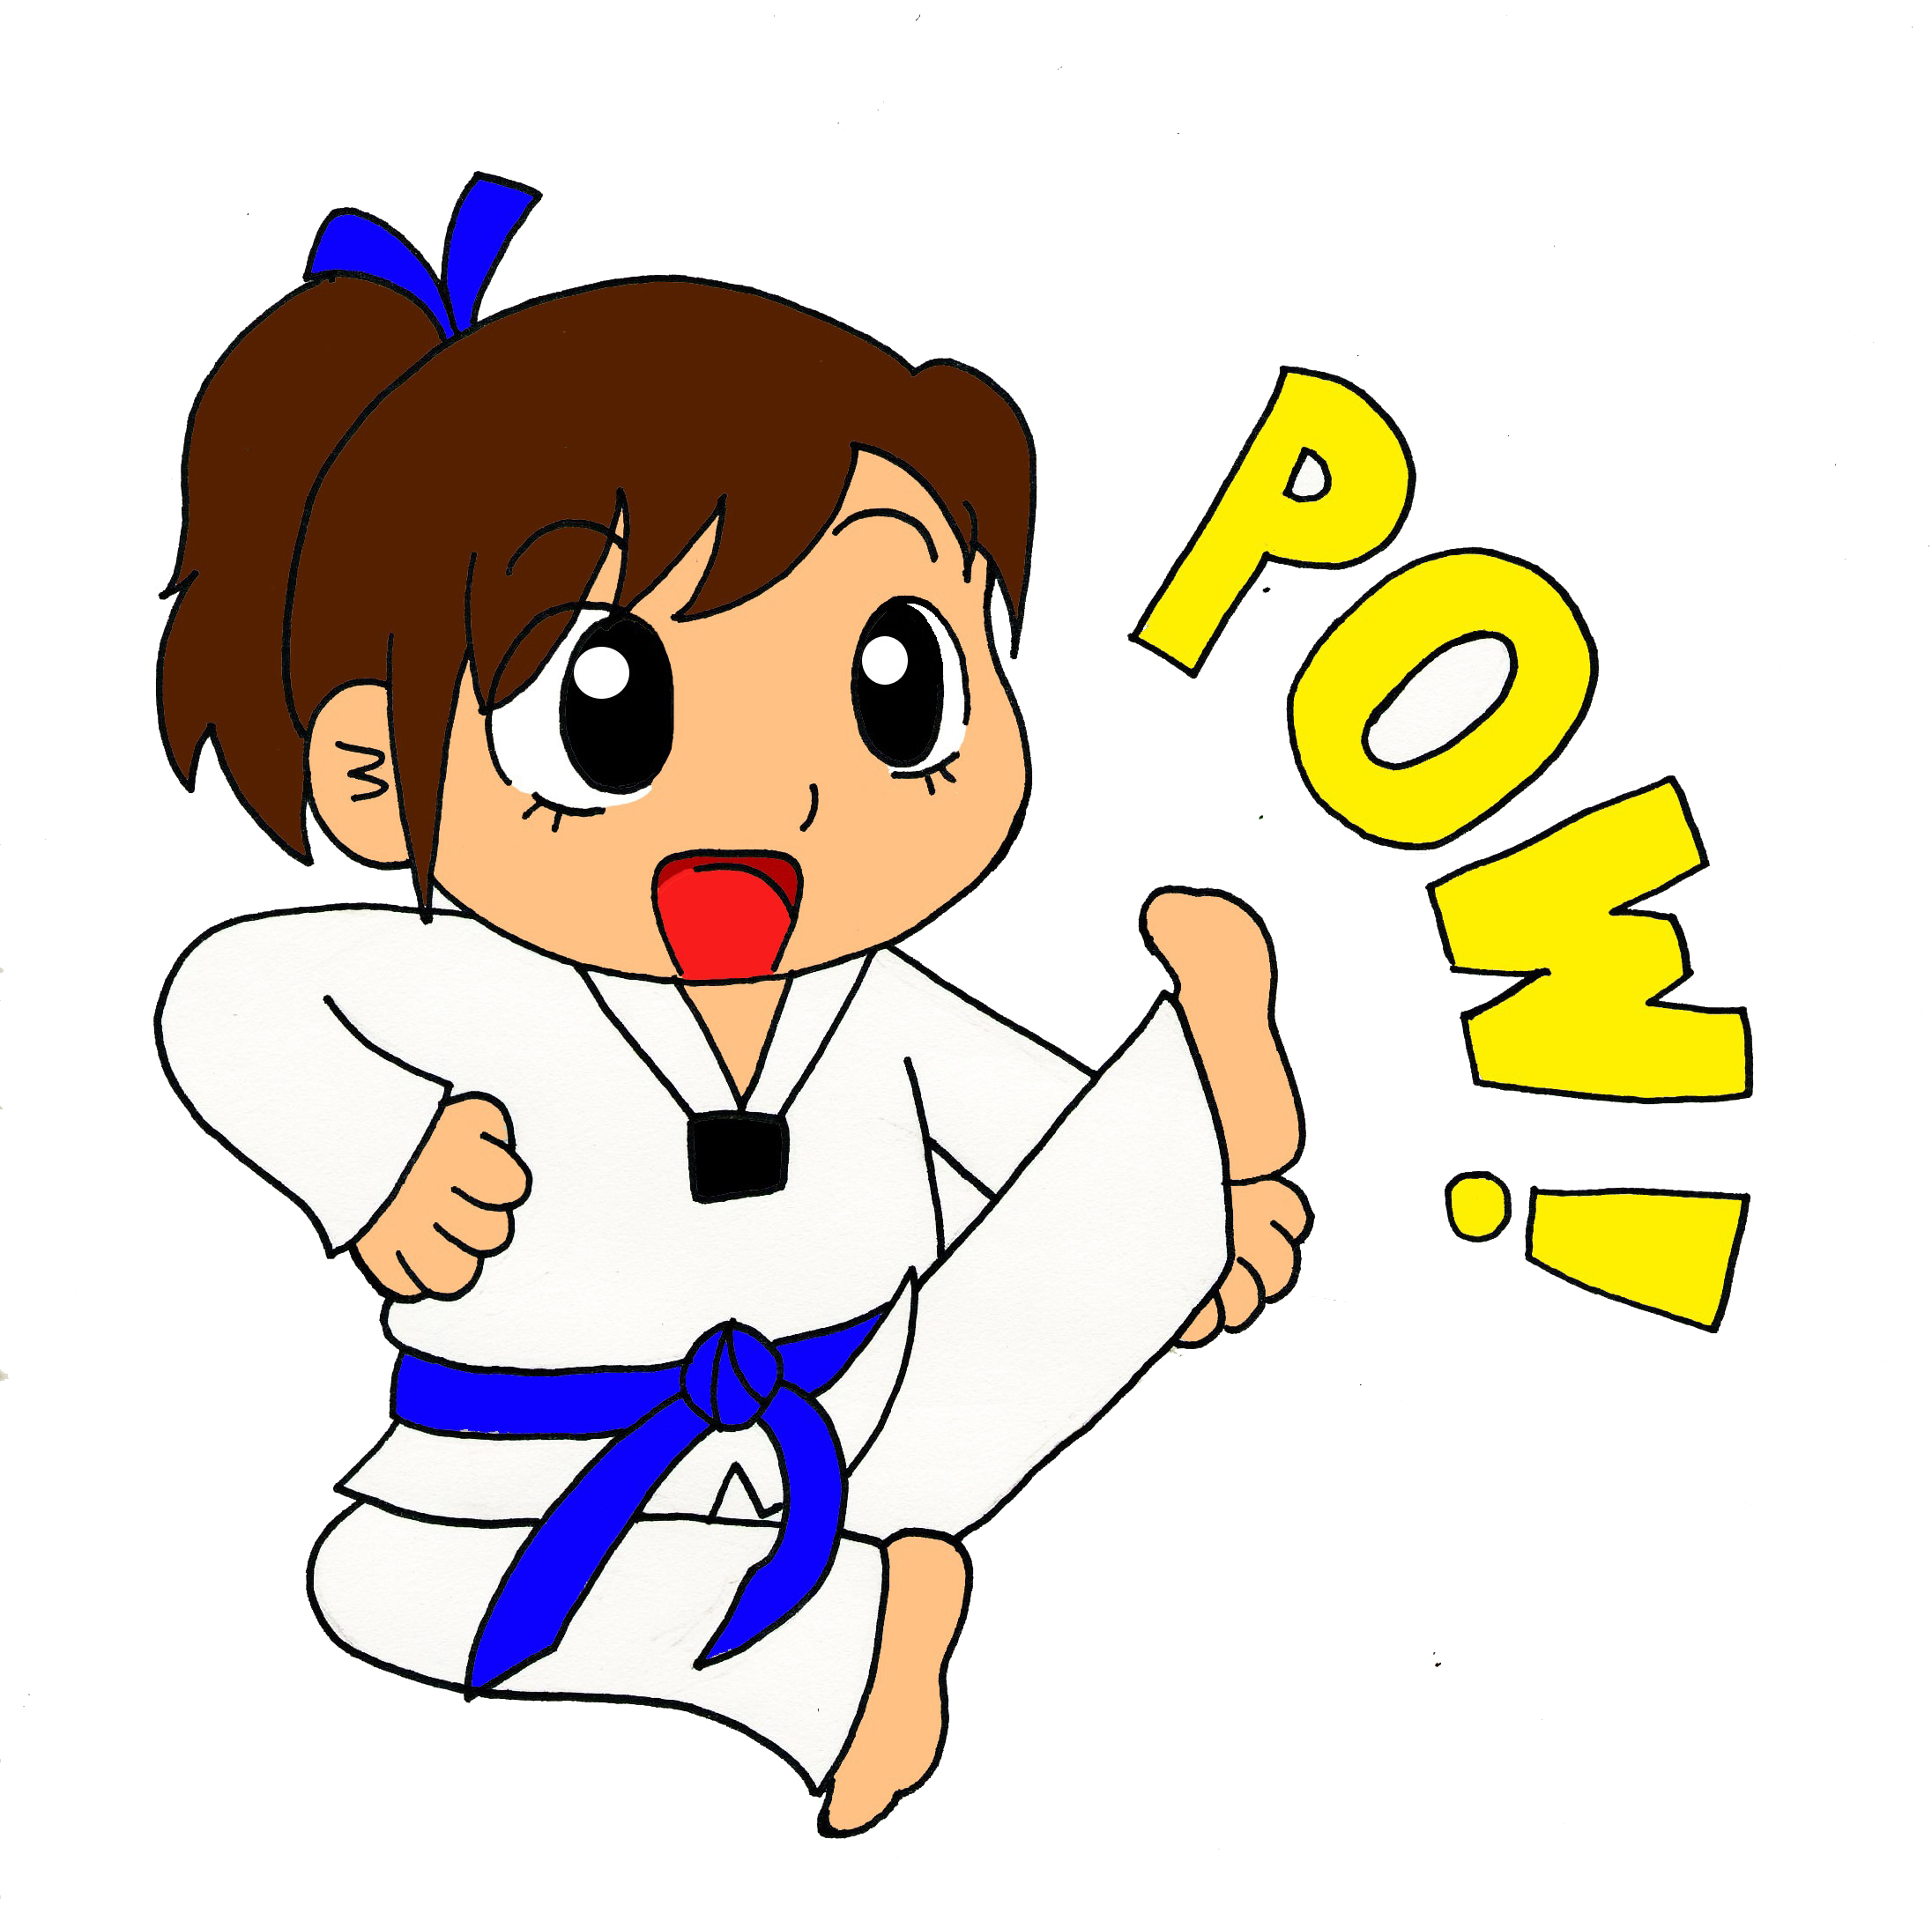 Taekwondo Free Cliparts That You Can Download To You Computer And